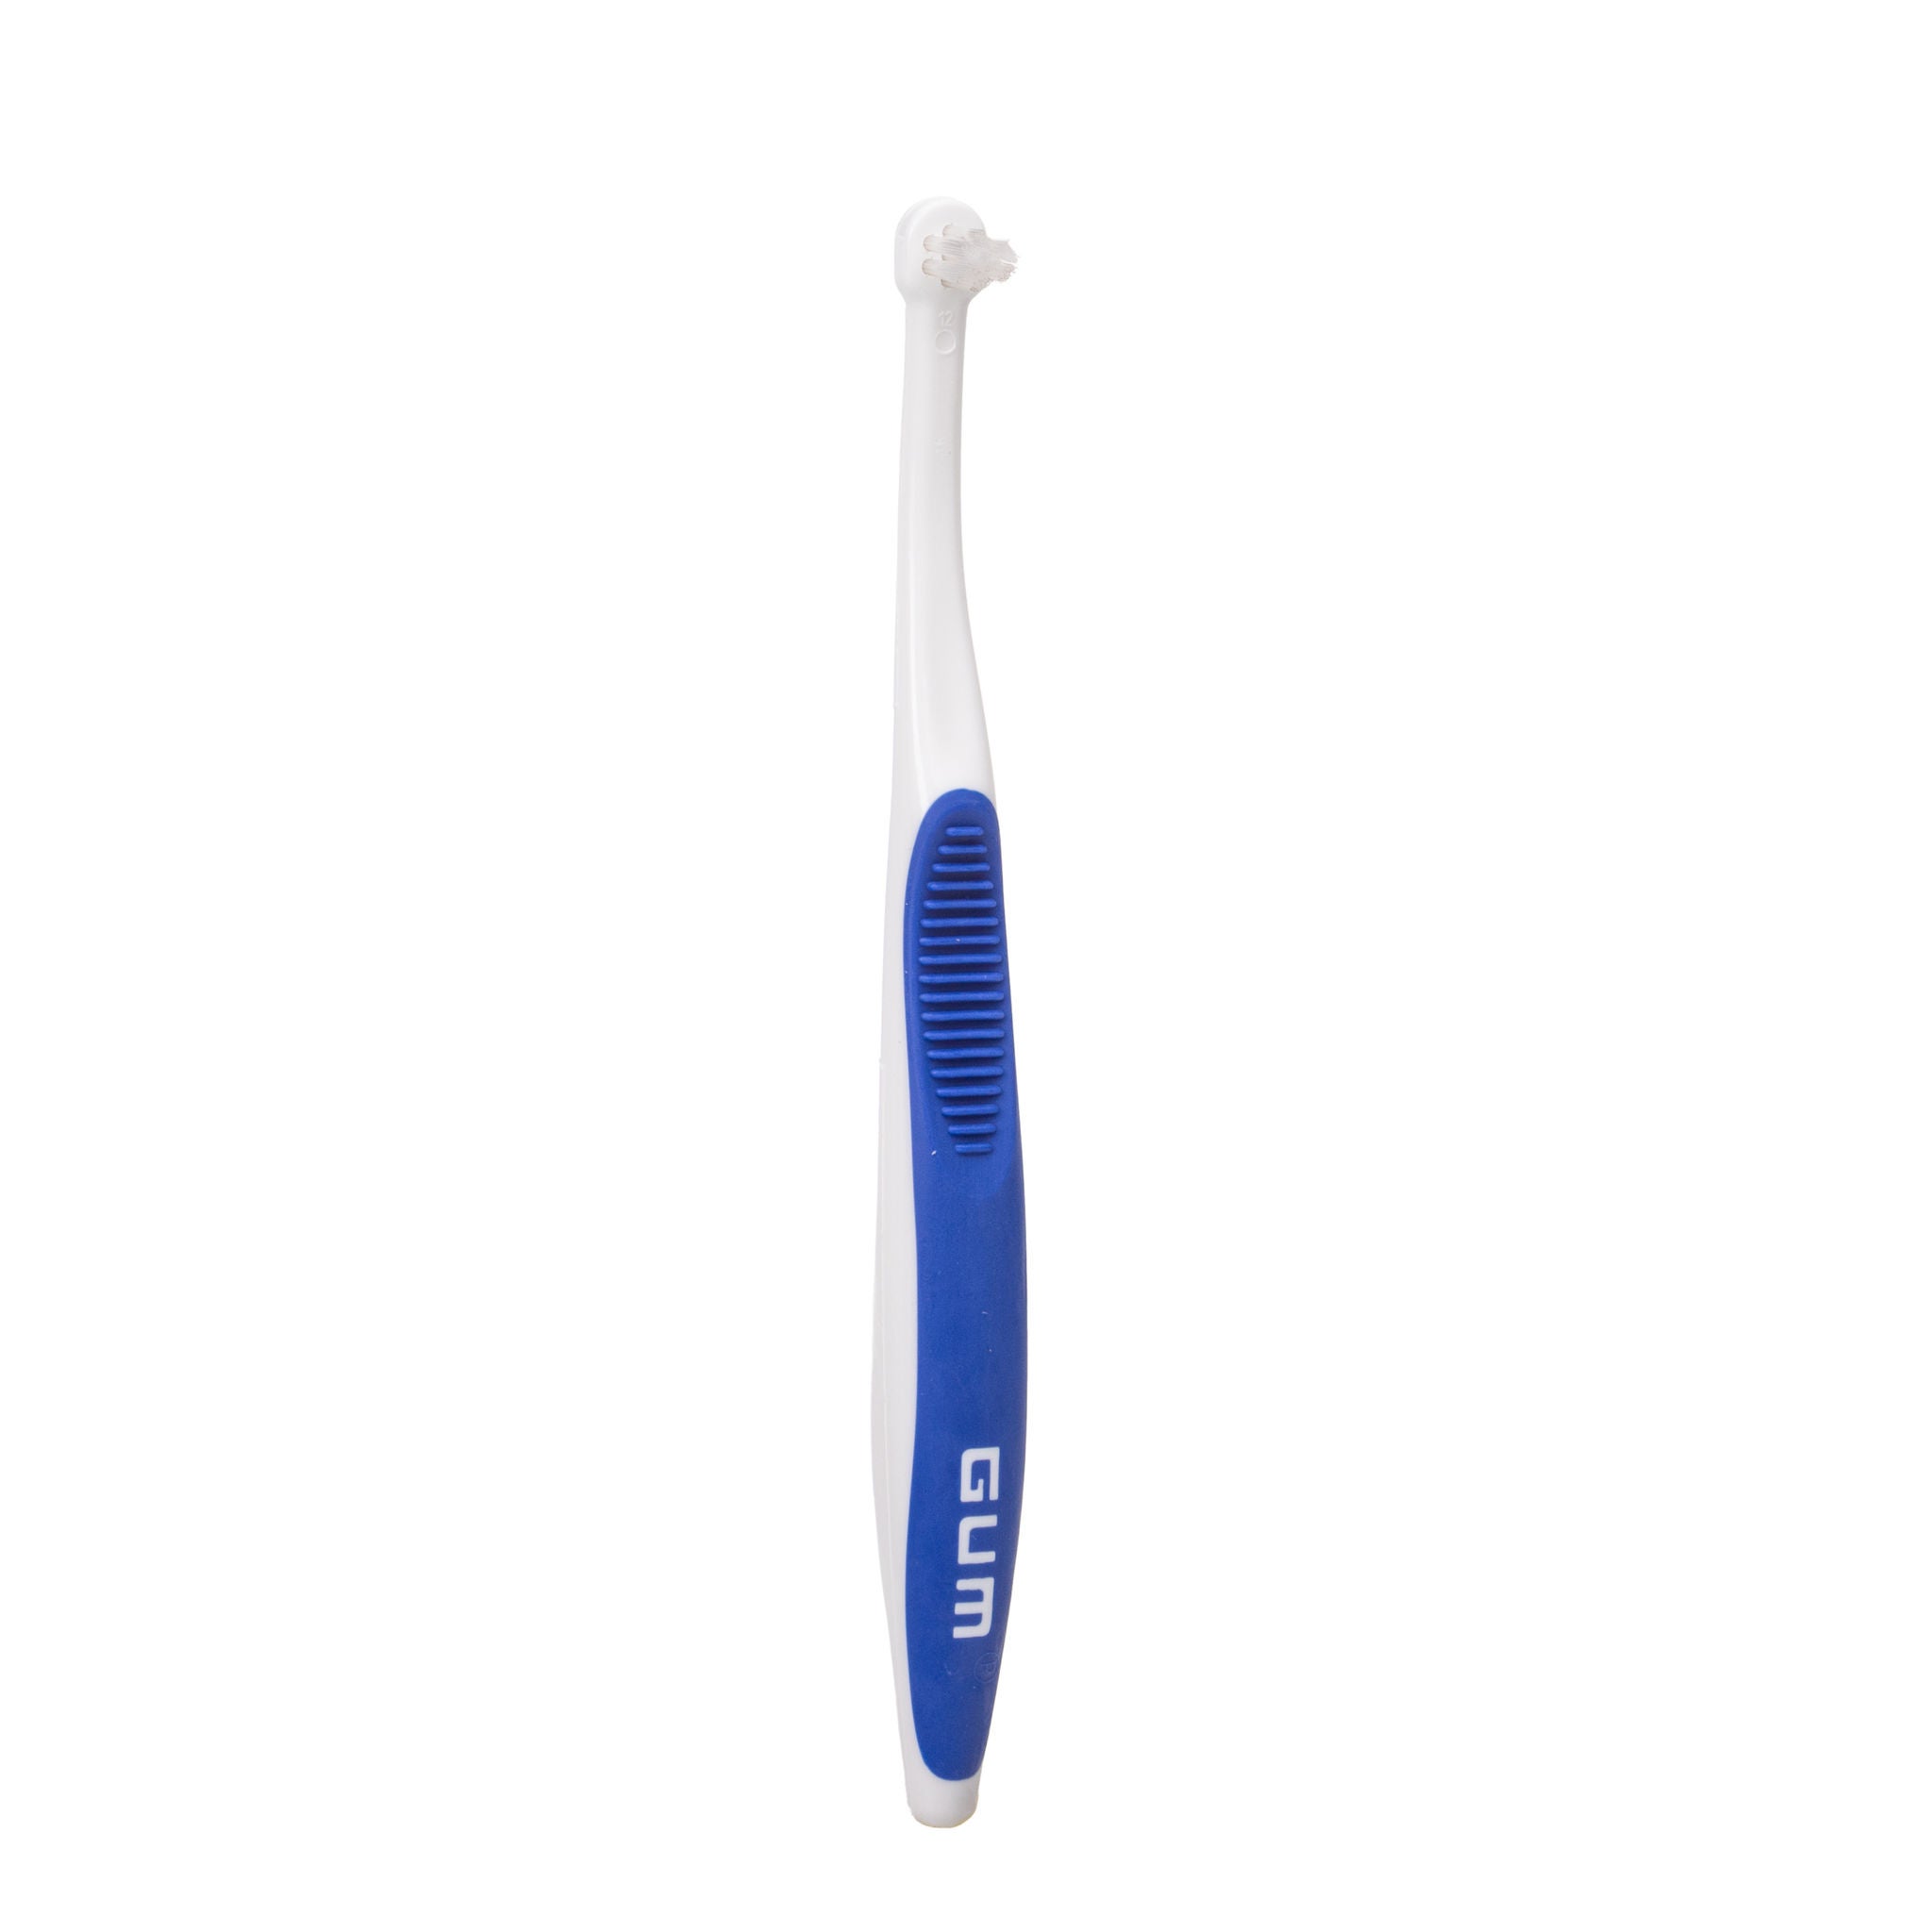 308MJ-GUM-END-TUFT-TOOTHBRUSHES-BLUE-SMALL-SOFT-N5.jpg